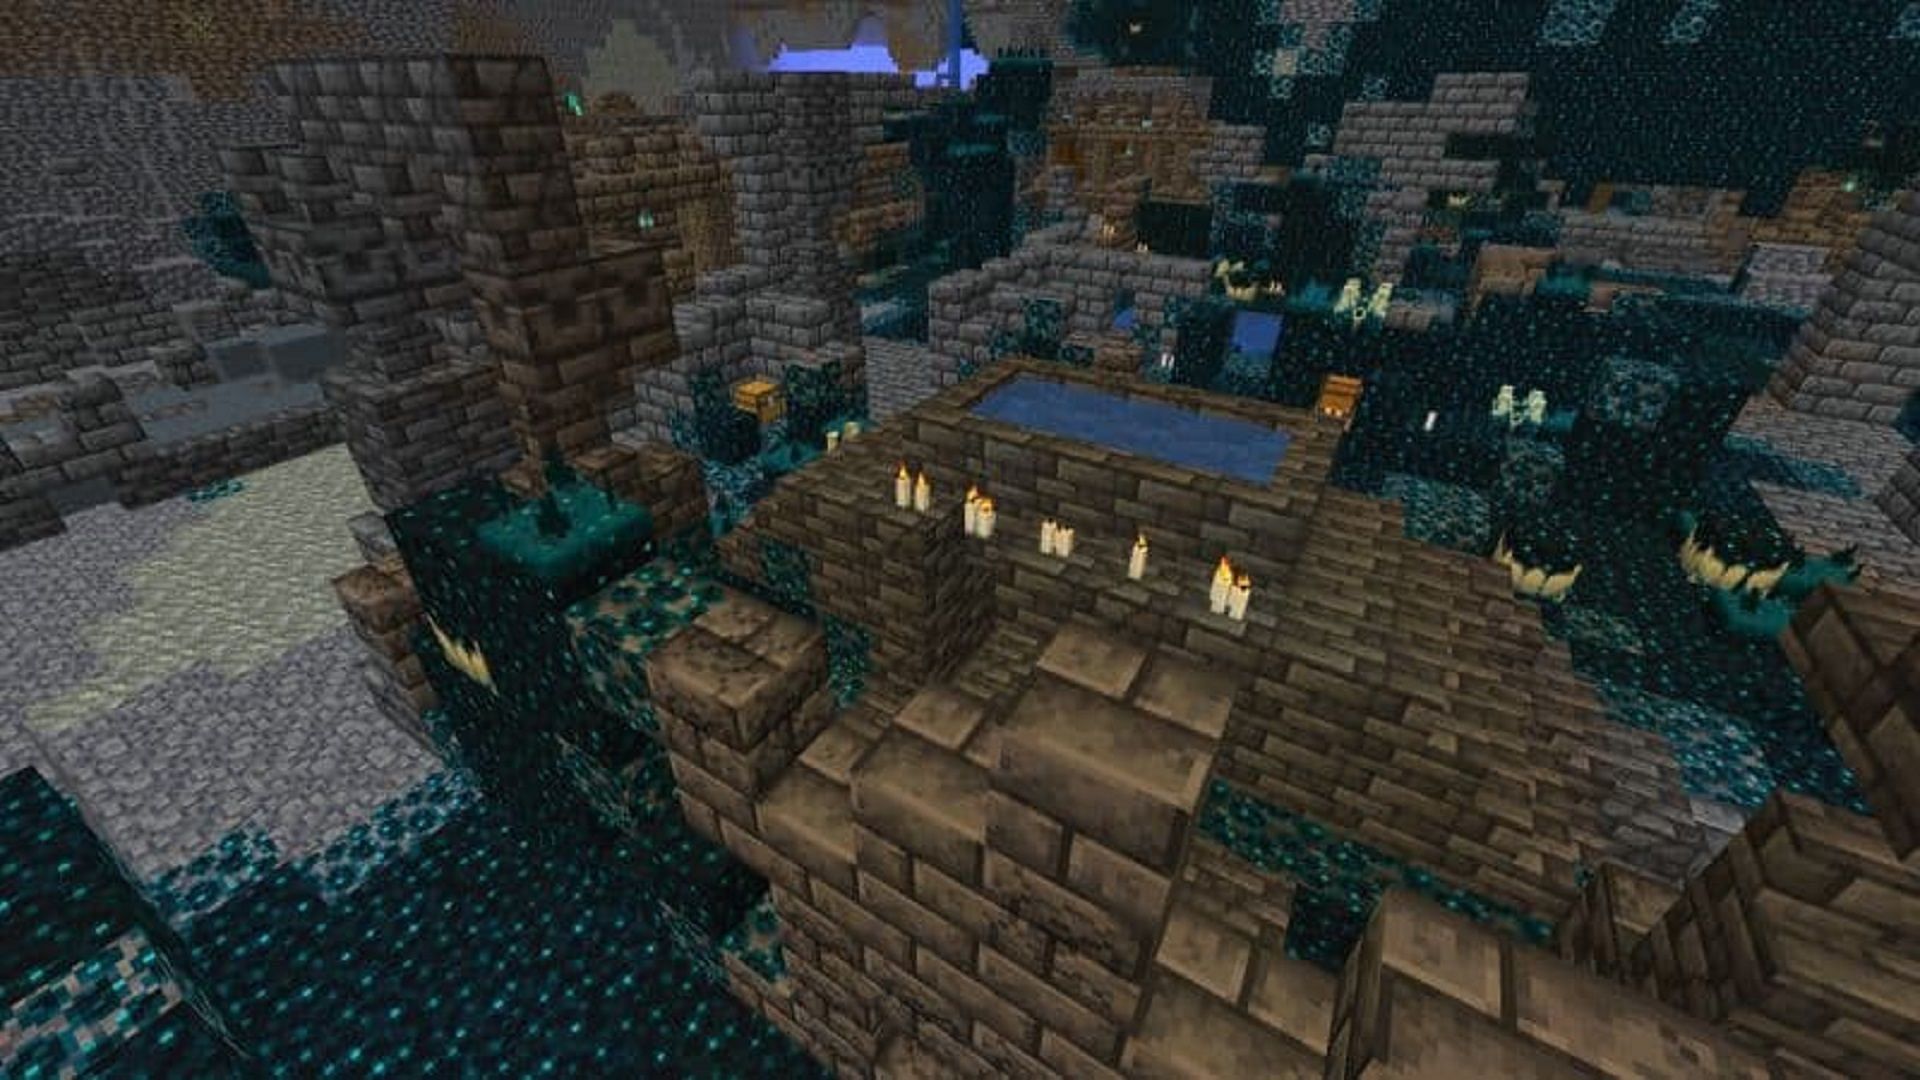 Players will encounter a dangerous situation in this seed (Image via Mojang)